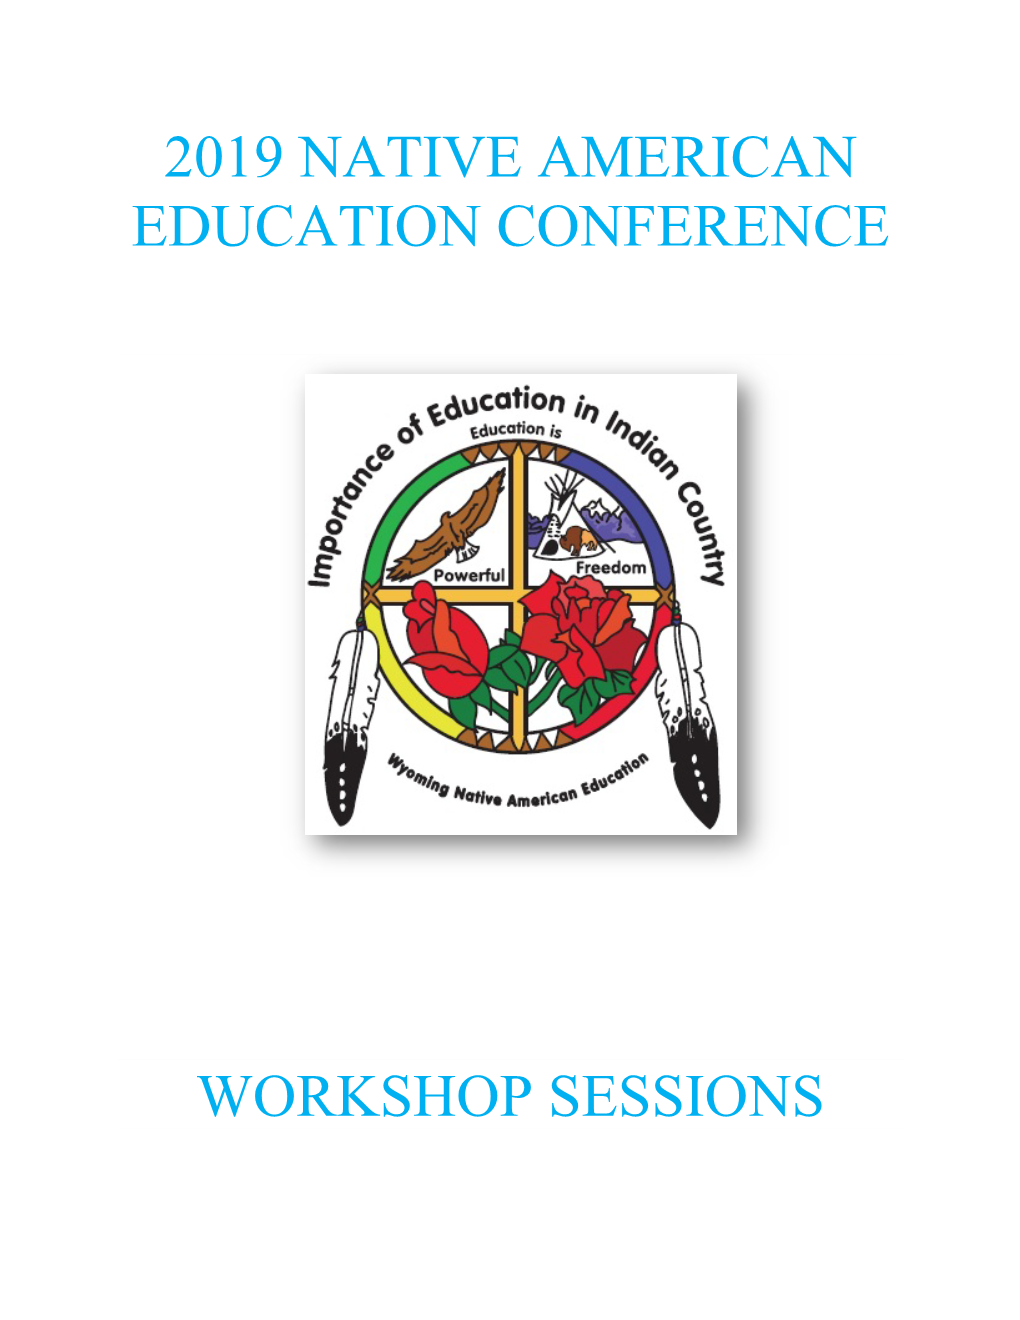 2019 Native American Education Conference Workshop Sessions